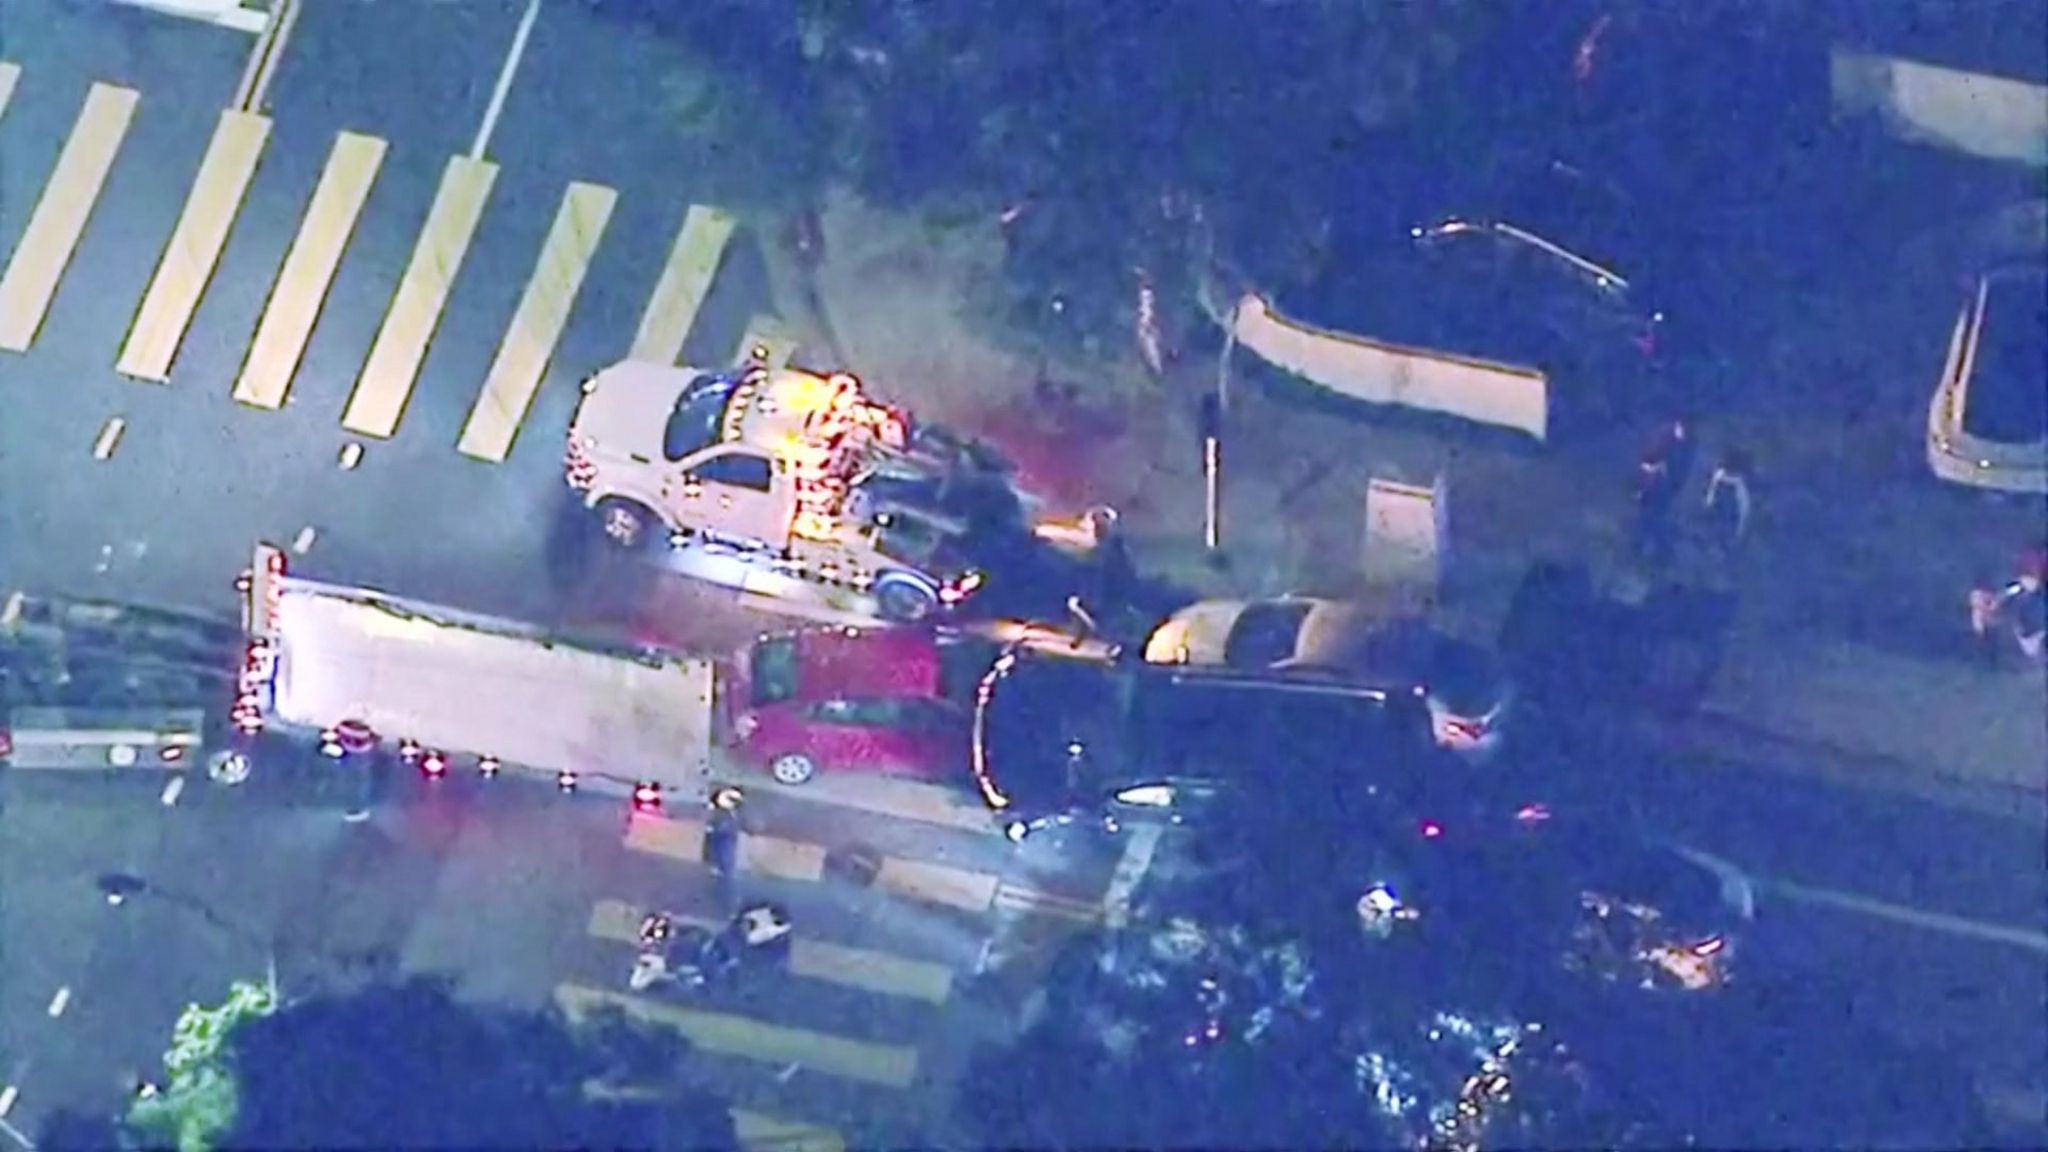 Crash scene as seen from a helicopter